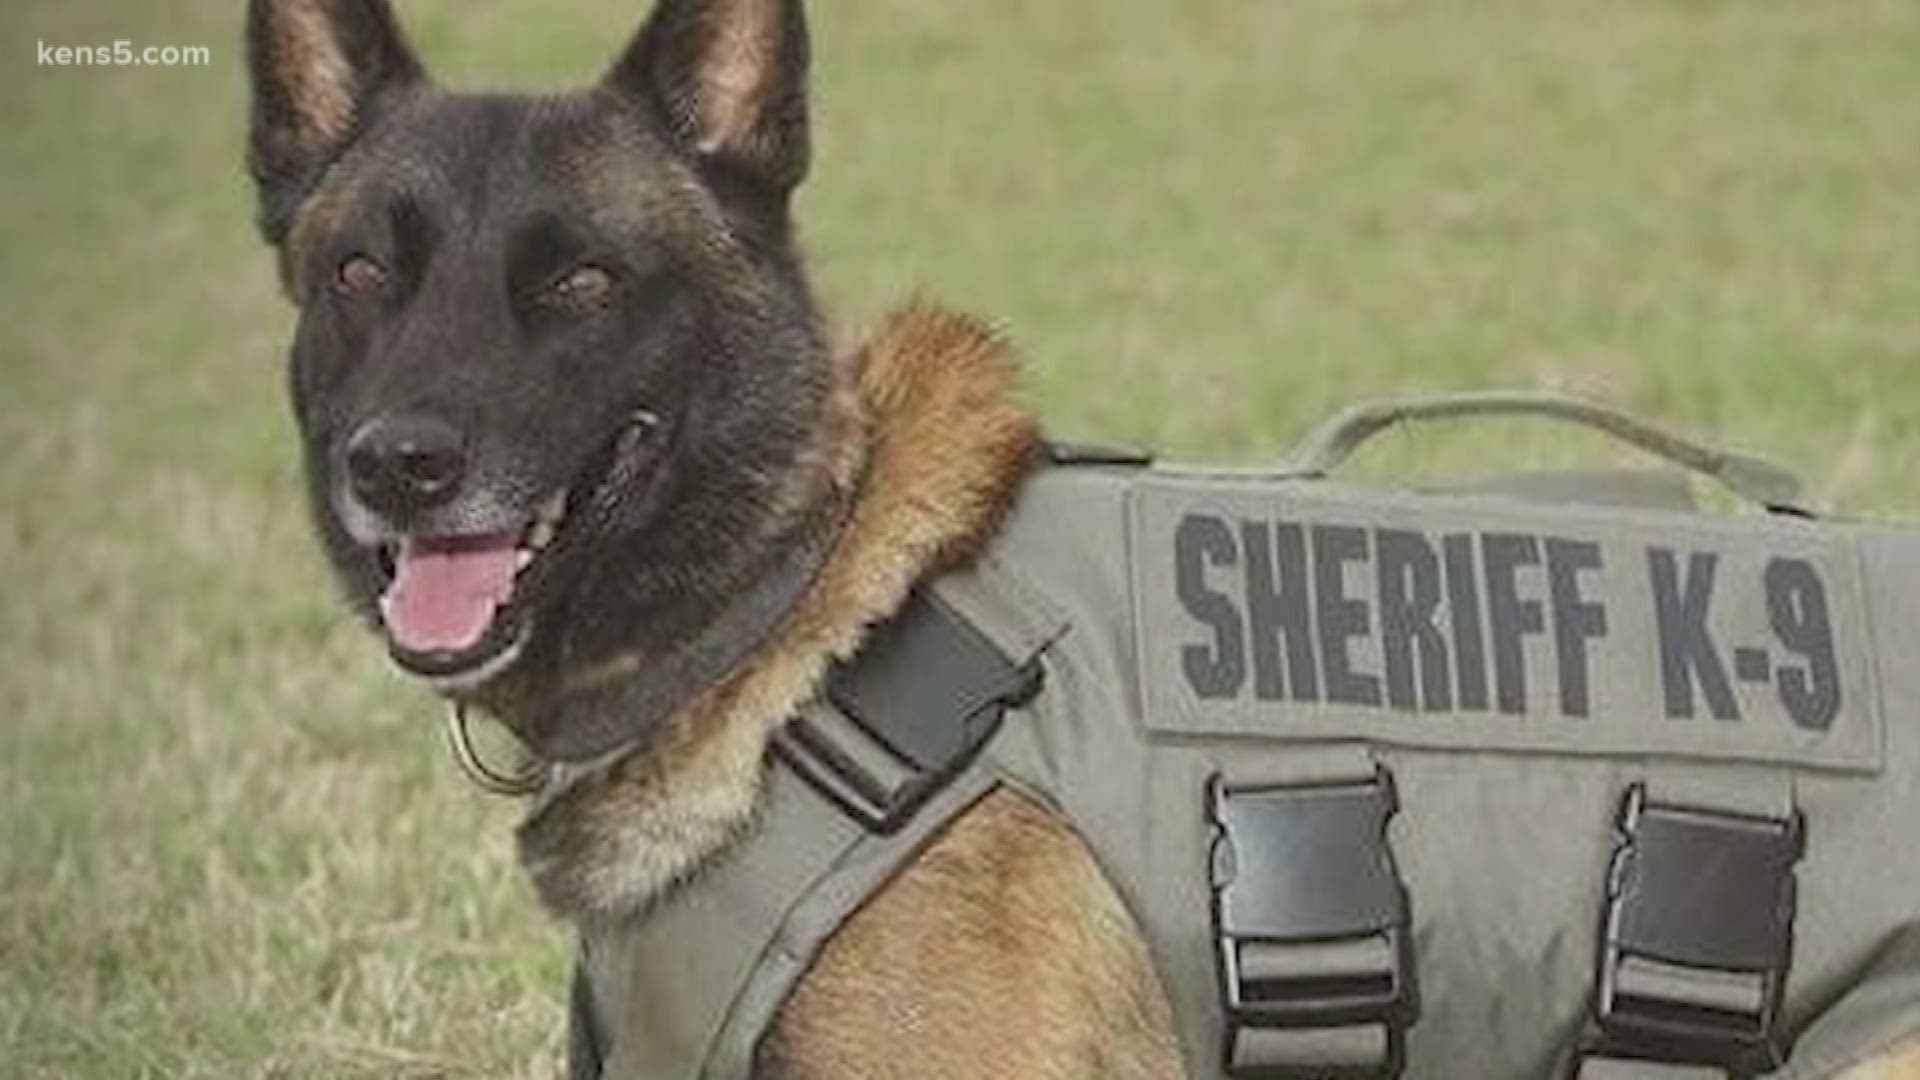 San Antonio says goodbye to a Bexar County K-9 killed in the line of duty. Eyewitness News reporter Jaleesa Irizarry was at today's memorial service.